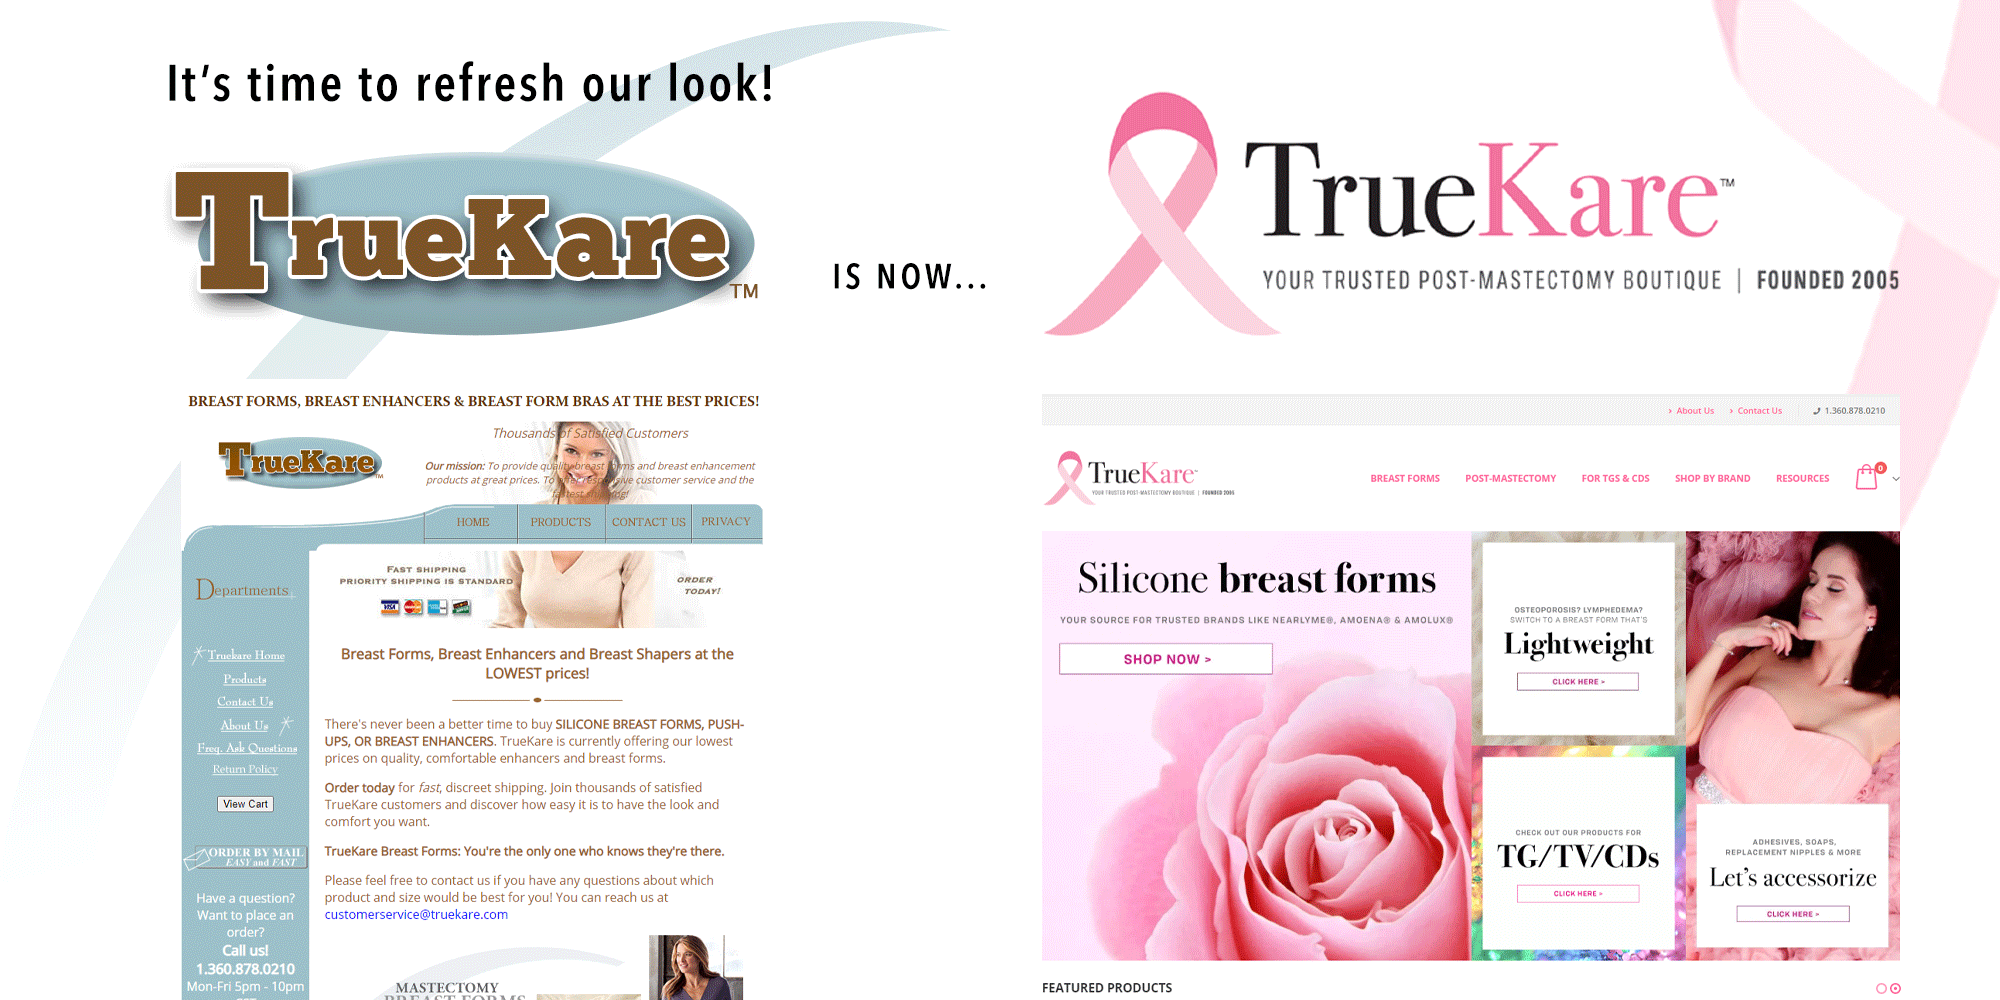 It's time to refresh our look! TrueKare (blue and brown logo) is now... TrueKare your trusted post-mastectomy boutique founded 2005 (pink ribbon)